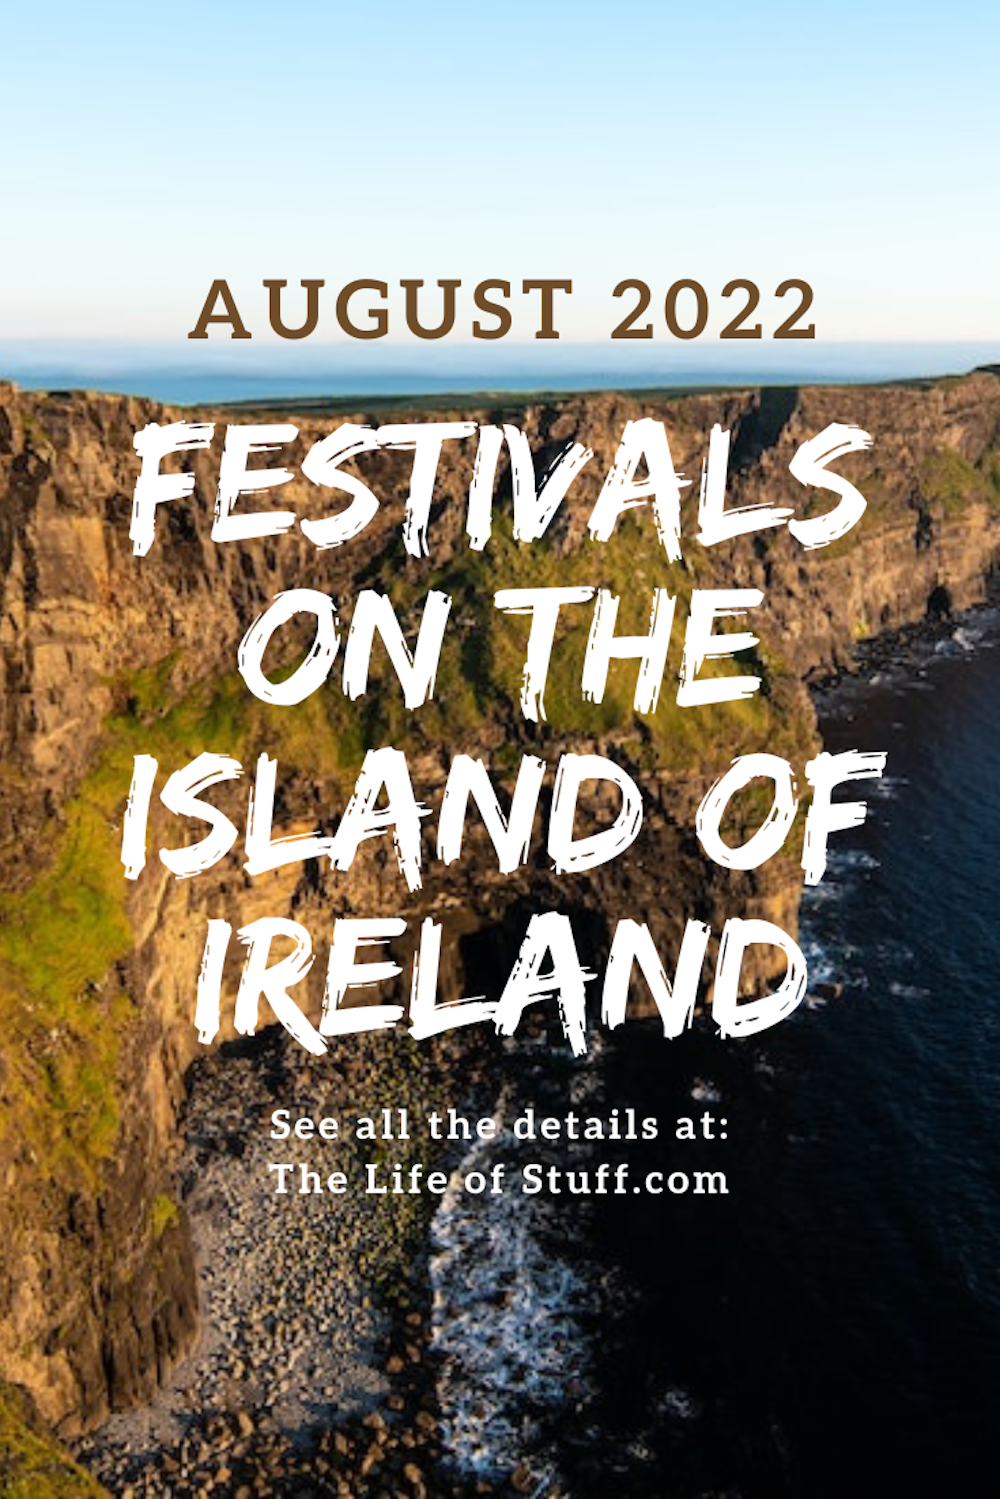 What’s On - Top Festivals this August 2022 in Ireland - The Life of Stuff